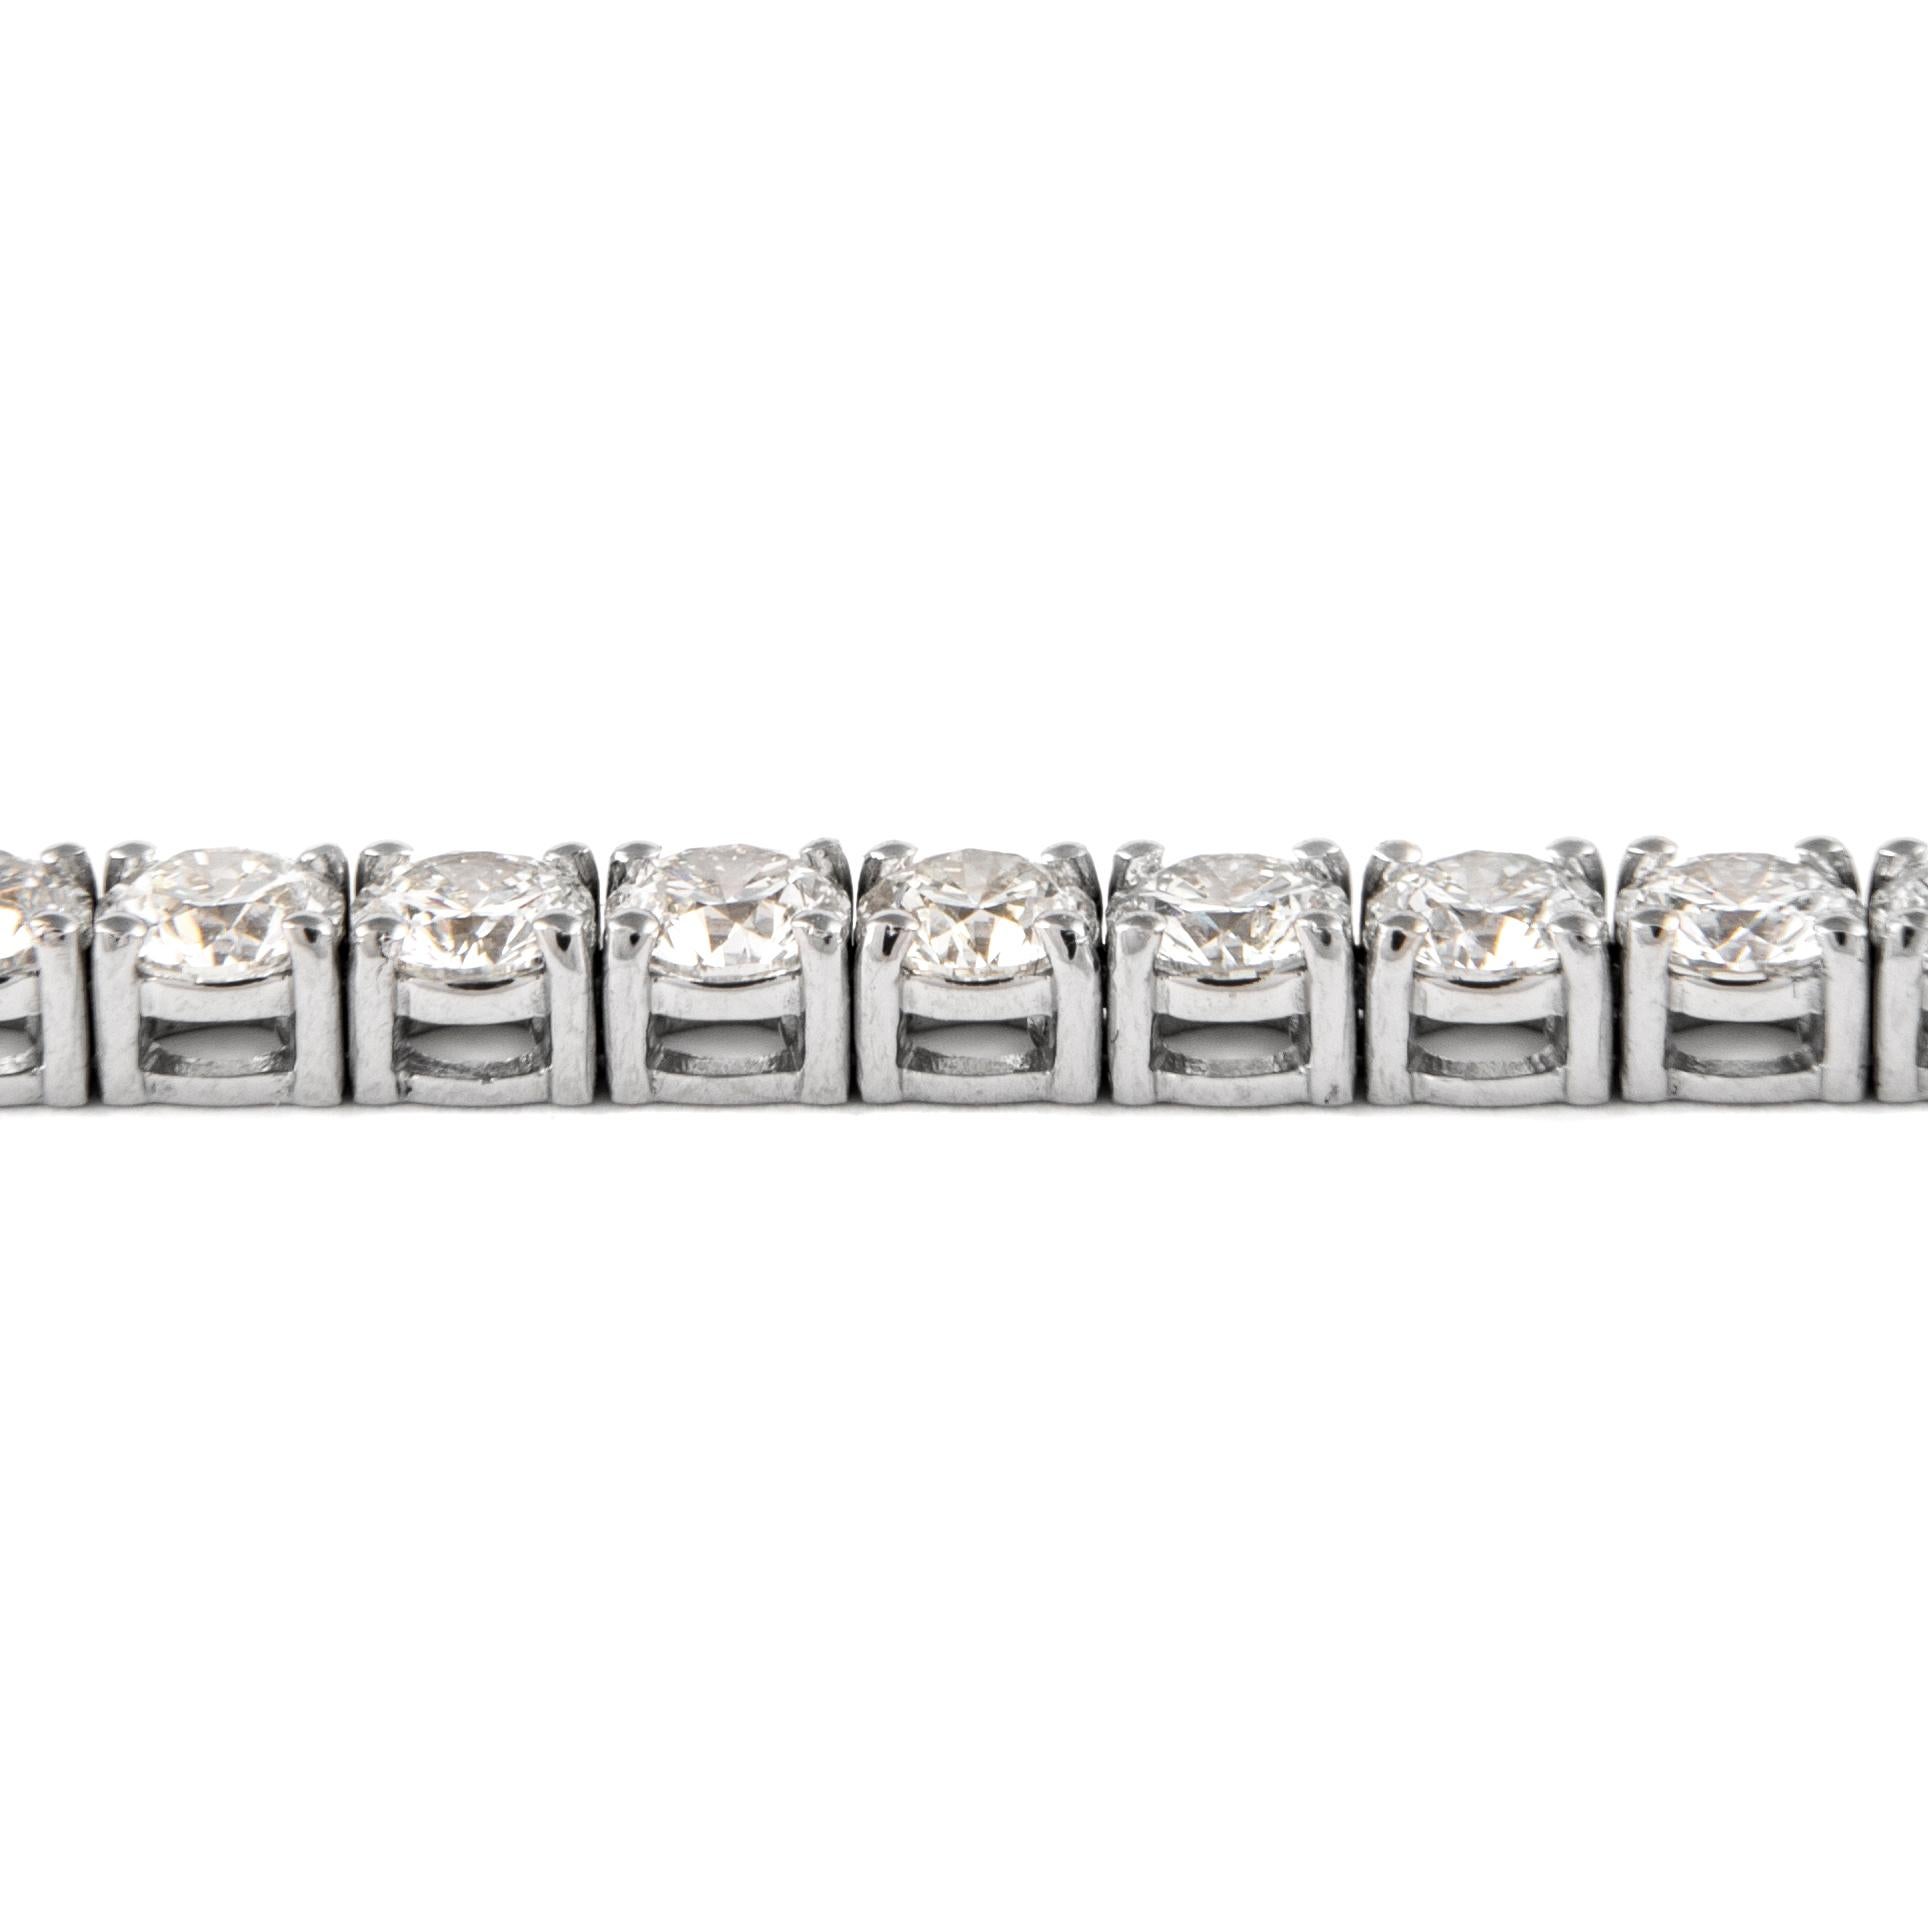 Exquisite and timeless diamonds tennis bracelet, by Alexander Beverly Hills.
44 round brilliant diamonds, 10.26 carats. Approximately G/H color and VS clarity. Four prong set in 18k white gold, 12.63 grams, 7 inches. 
Accommodated with an up-to-date